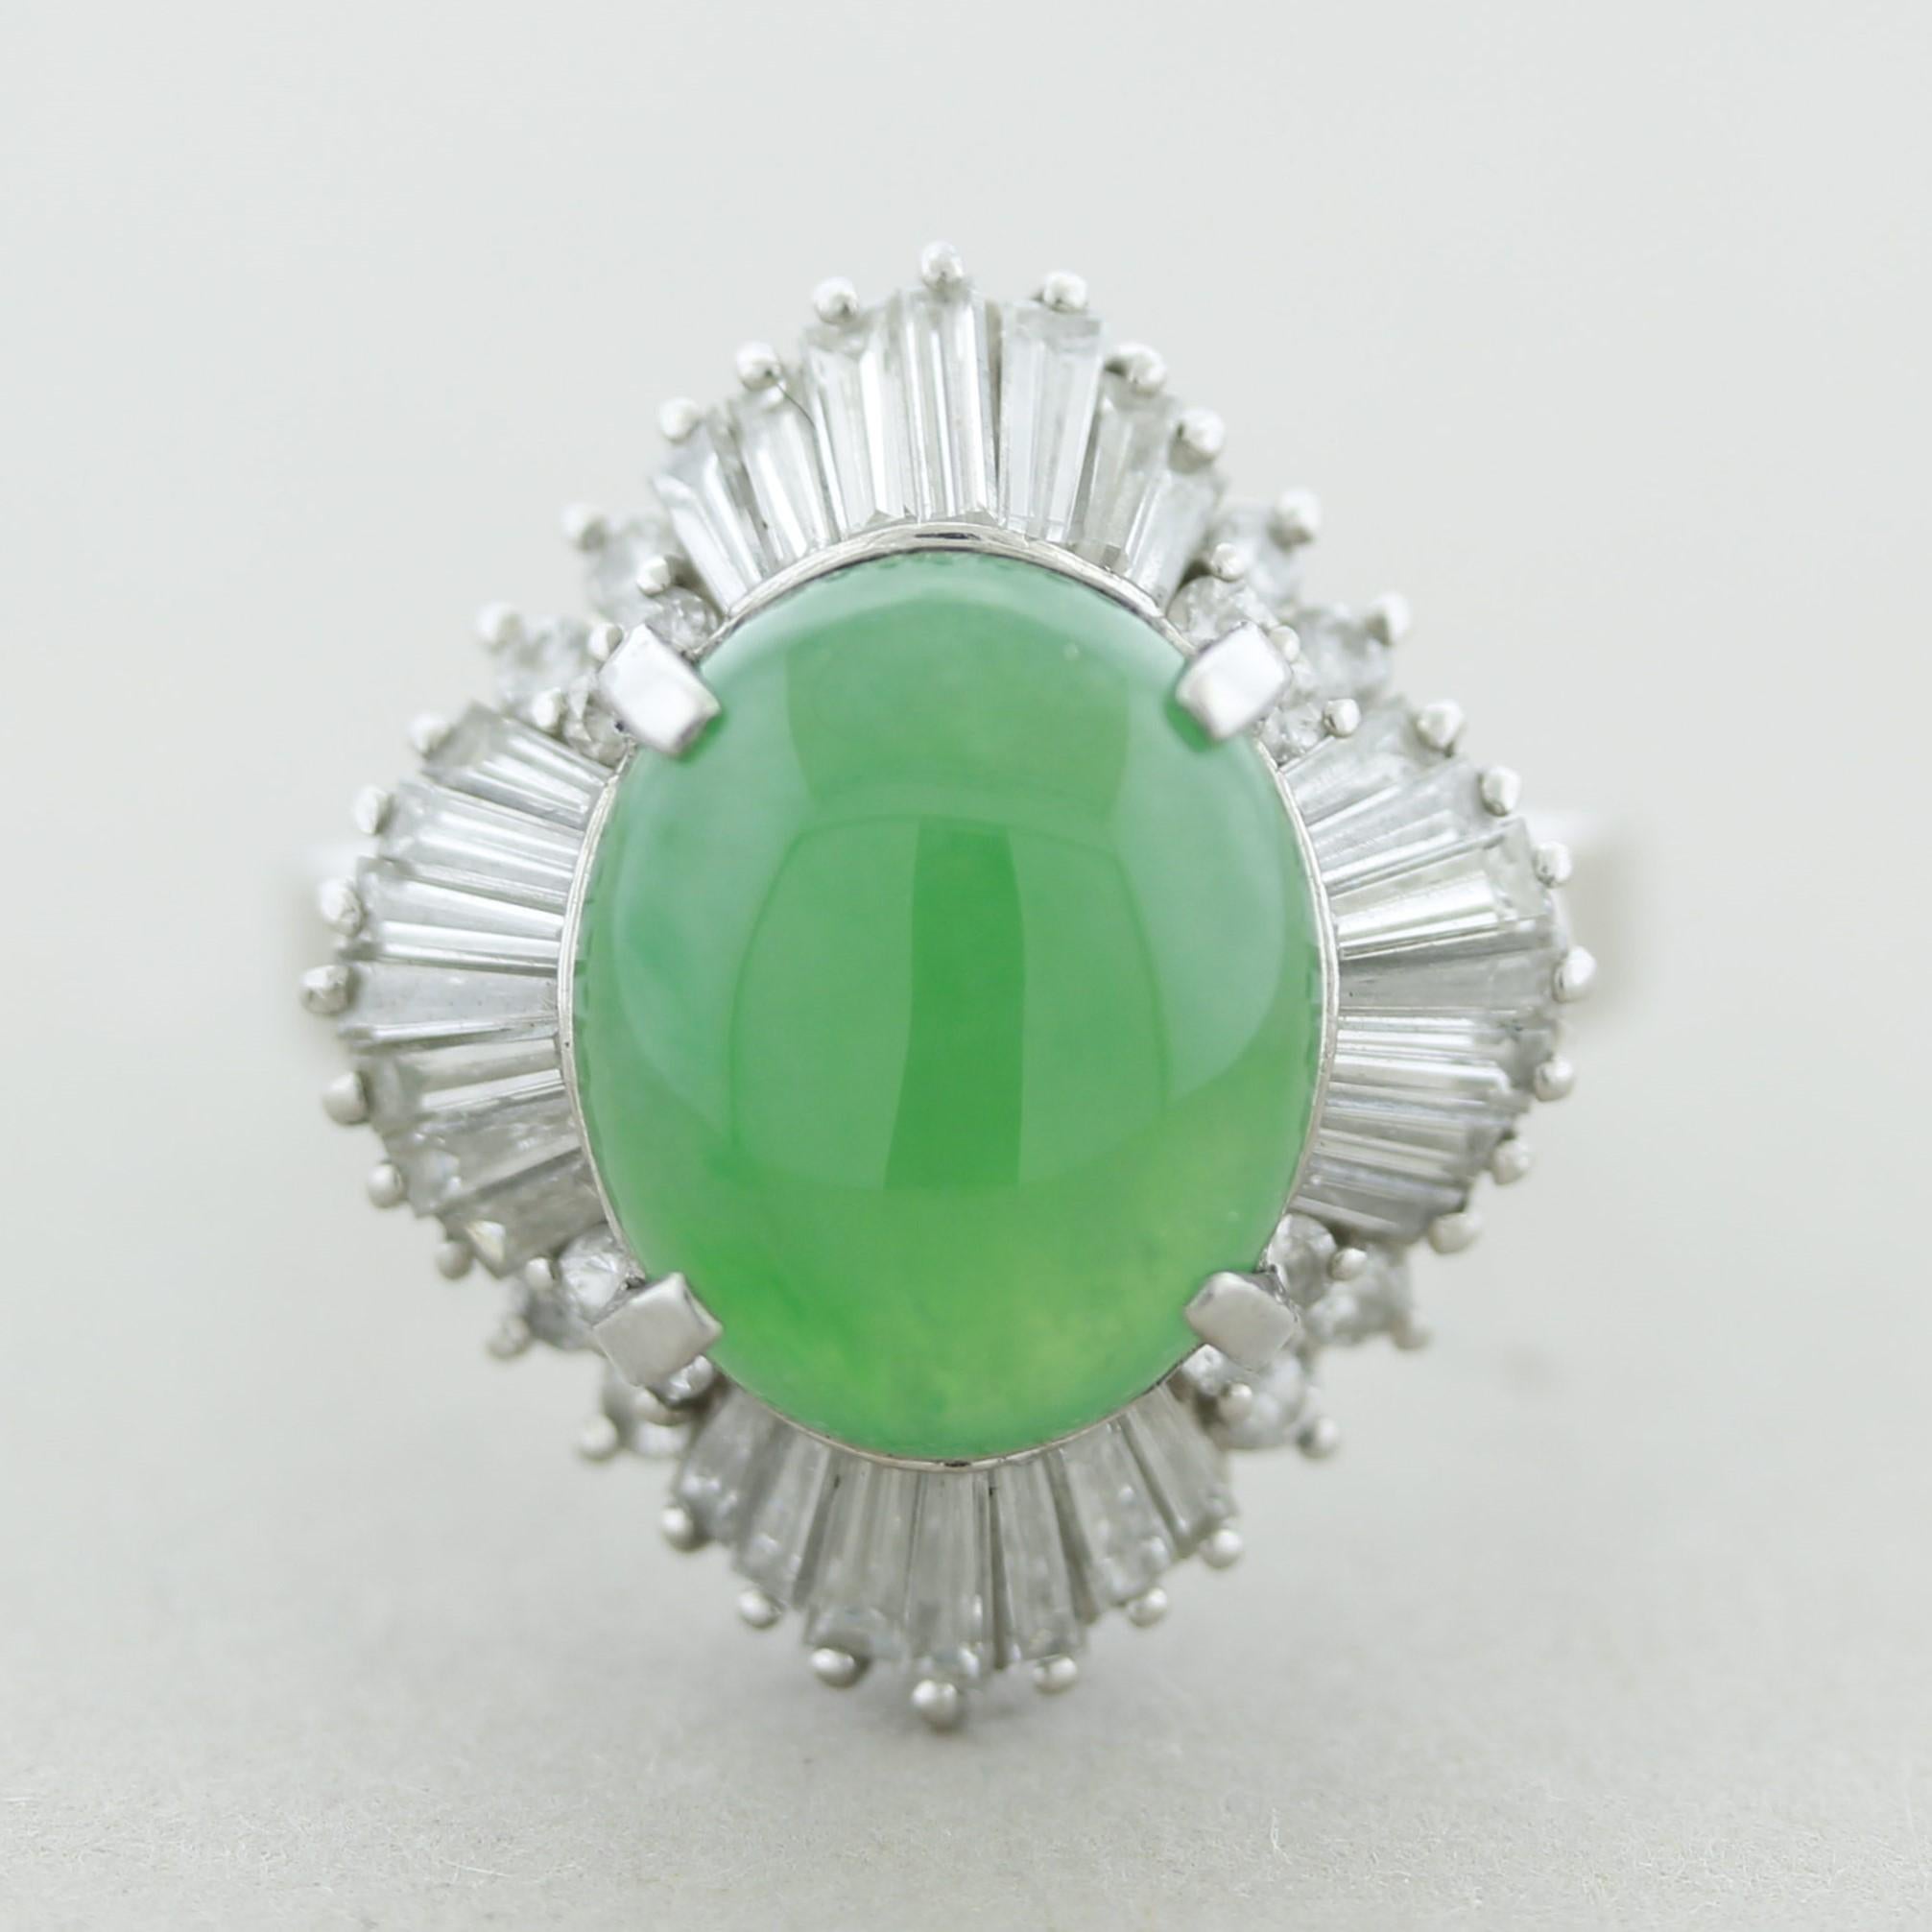 A lovely natural jade & diamond ring. The jade has a bright green color with excellent luster and weighs 5.95 carats. It is accented by 1.65 carats of round brilliant and baguette-cut diamonds set around the jade in a stylish pattern.